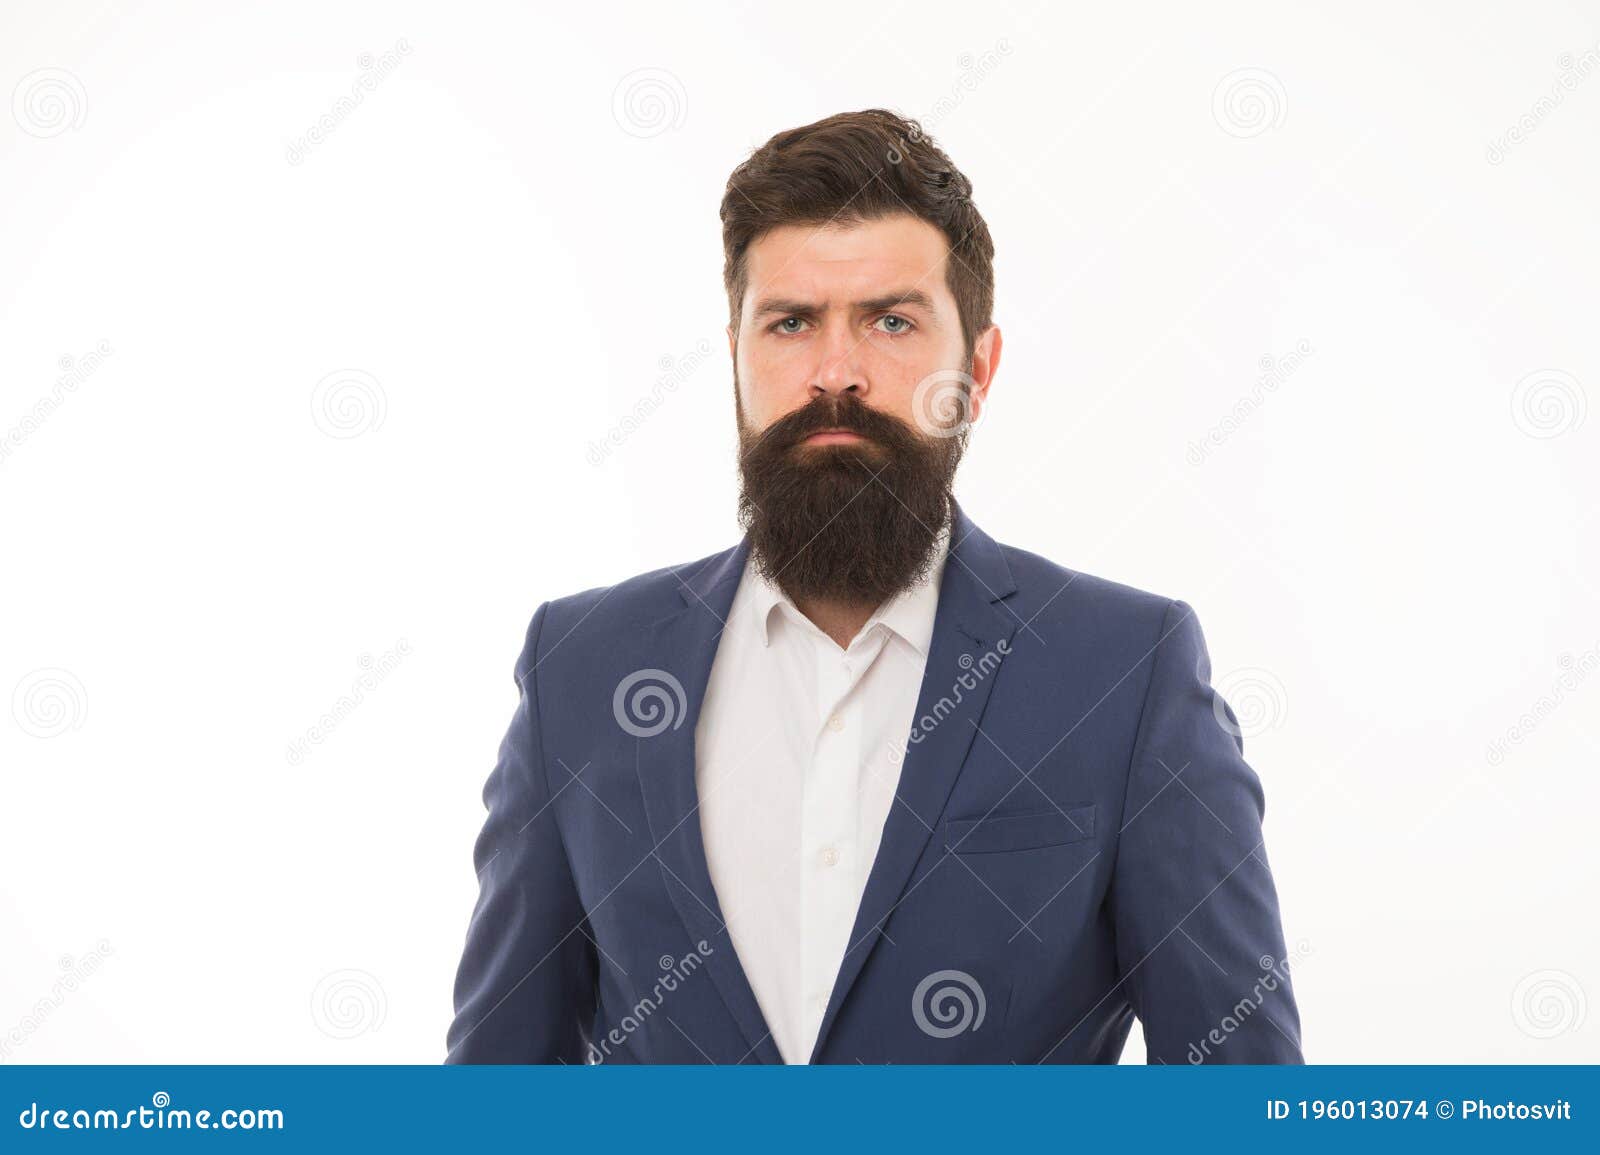 Classic Makes Man Look Elegant. Businessman or Business Man. Bearded Man in Fashion  Style Stock Photo - Image of employee, elegance: 196013074